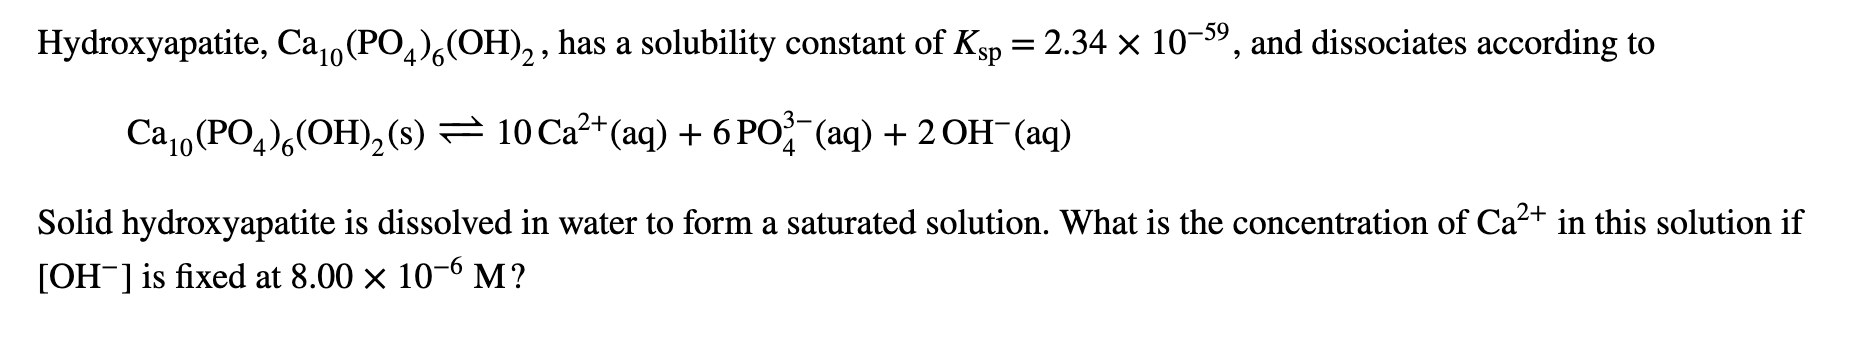 Hydroxyapatite, Ca0(PO)(OH)2,has a solubility constant of Ksp 2.34 x 10-59, and dissociates according to
Са (РОд),ОН),(8) — 10Са** (аq) + 6РО (аq) + 2ОН (aq)
4
Solid hydroxyapatite is dissolved in water to form a saturated solution. What is the concentration of Ca2 in this solution if
[OH-is fixed at 8.00 x 10-6 M?
